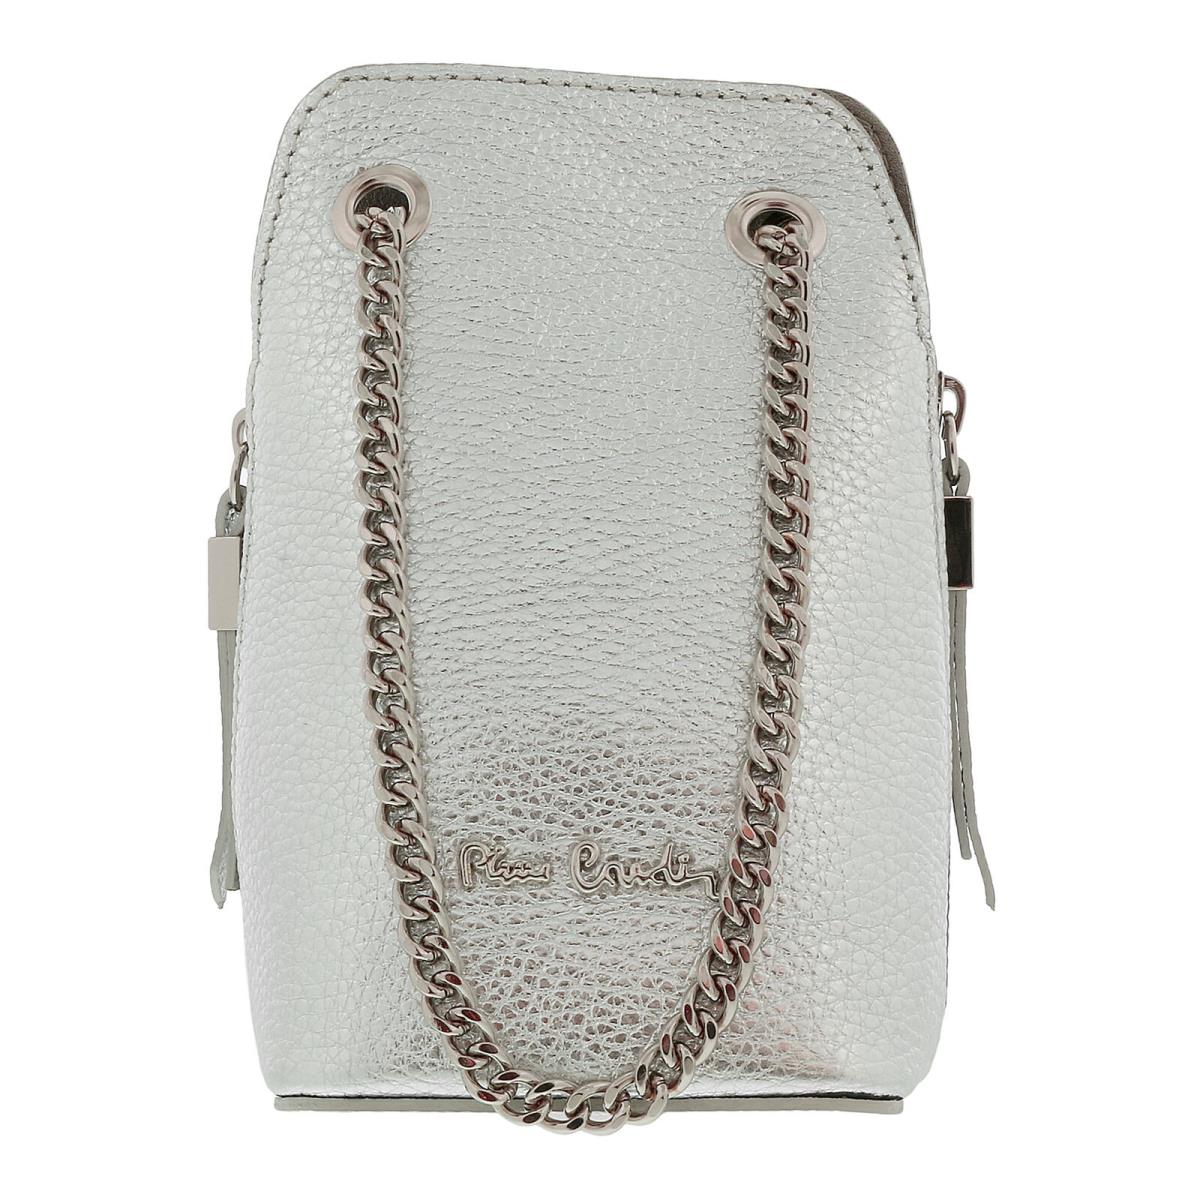 Pierre Cardin Silver Leather Curved Structured Chain Crossbody Bag - Silver